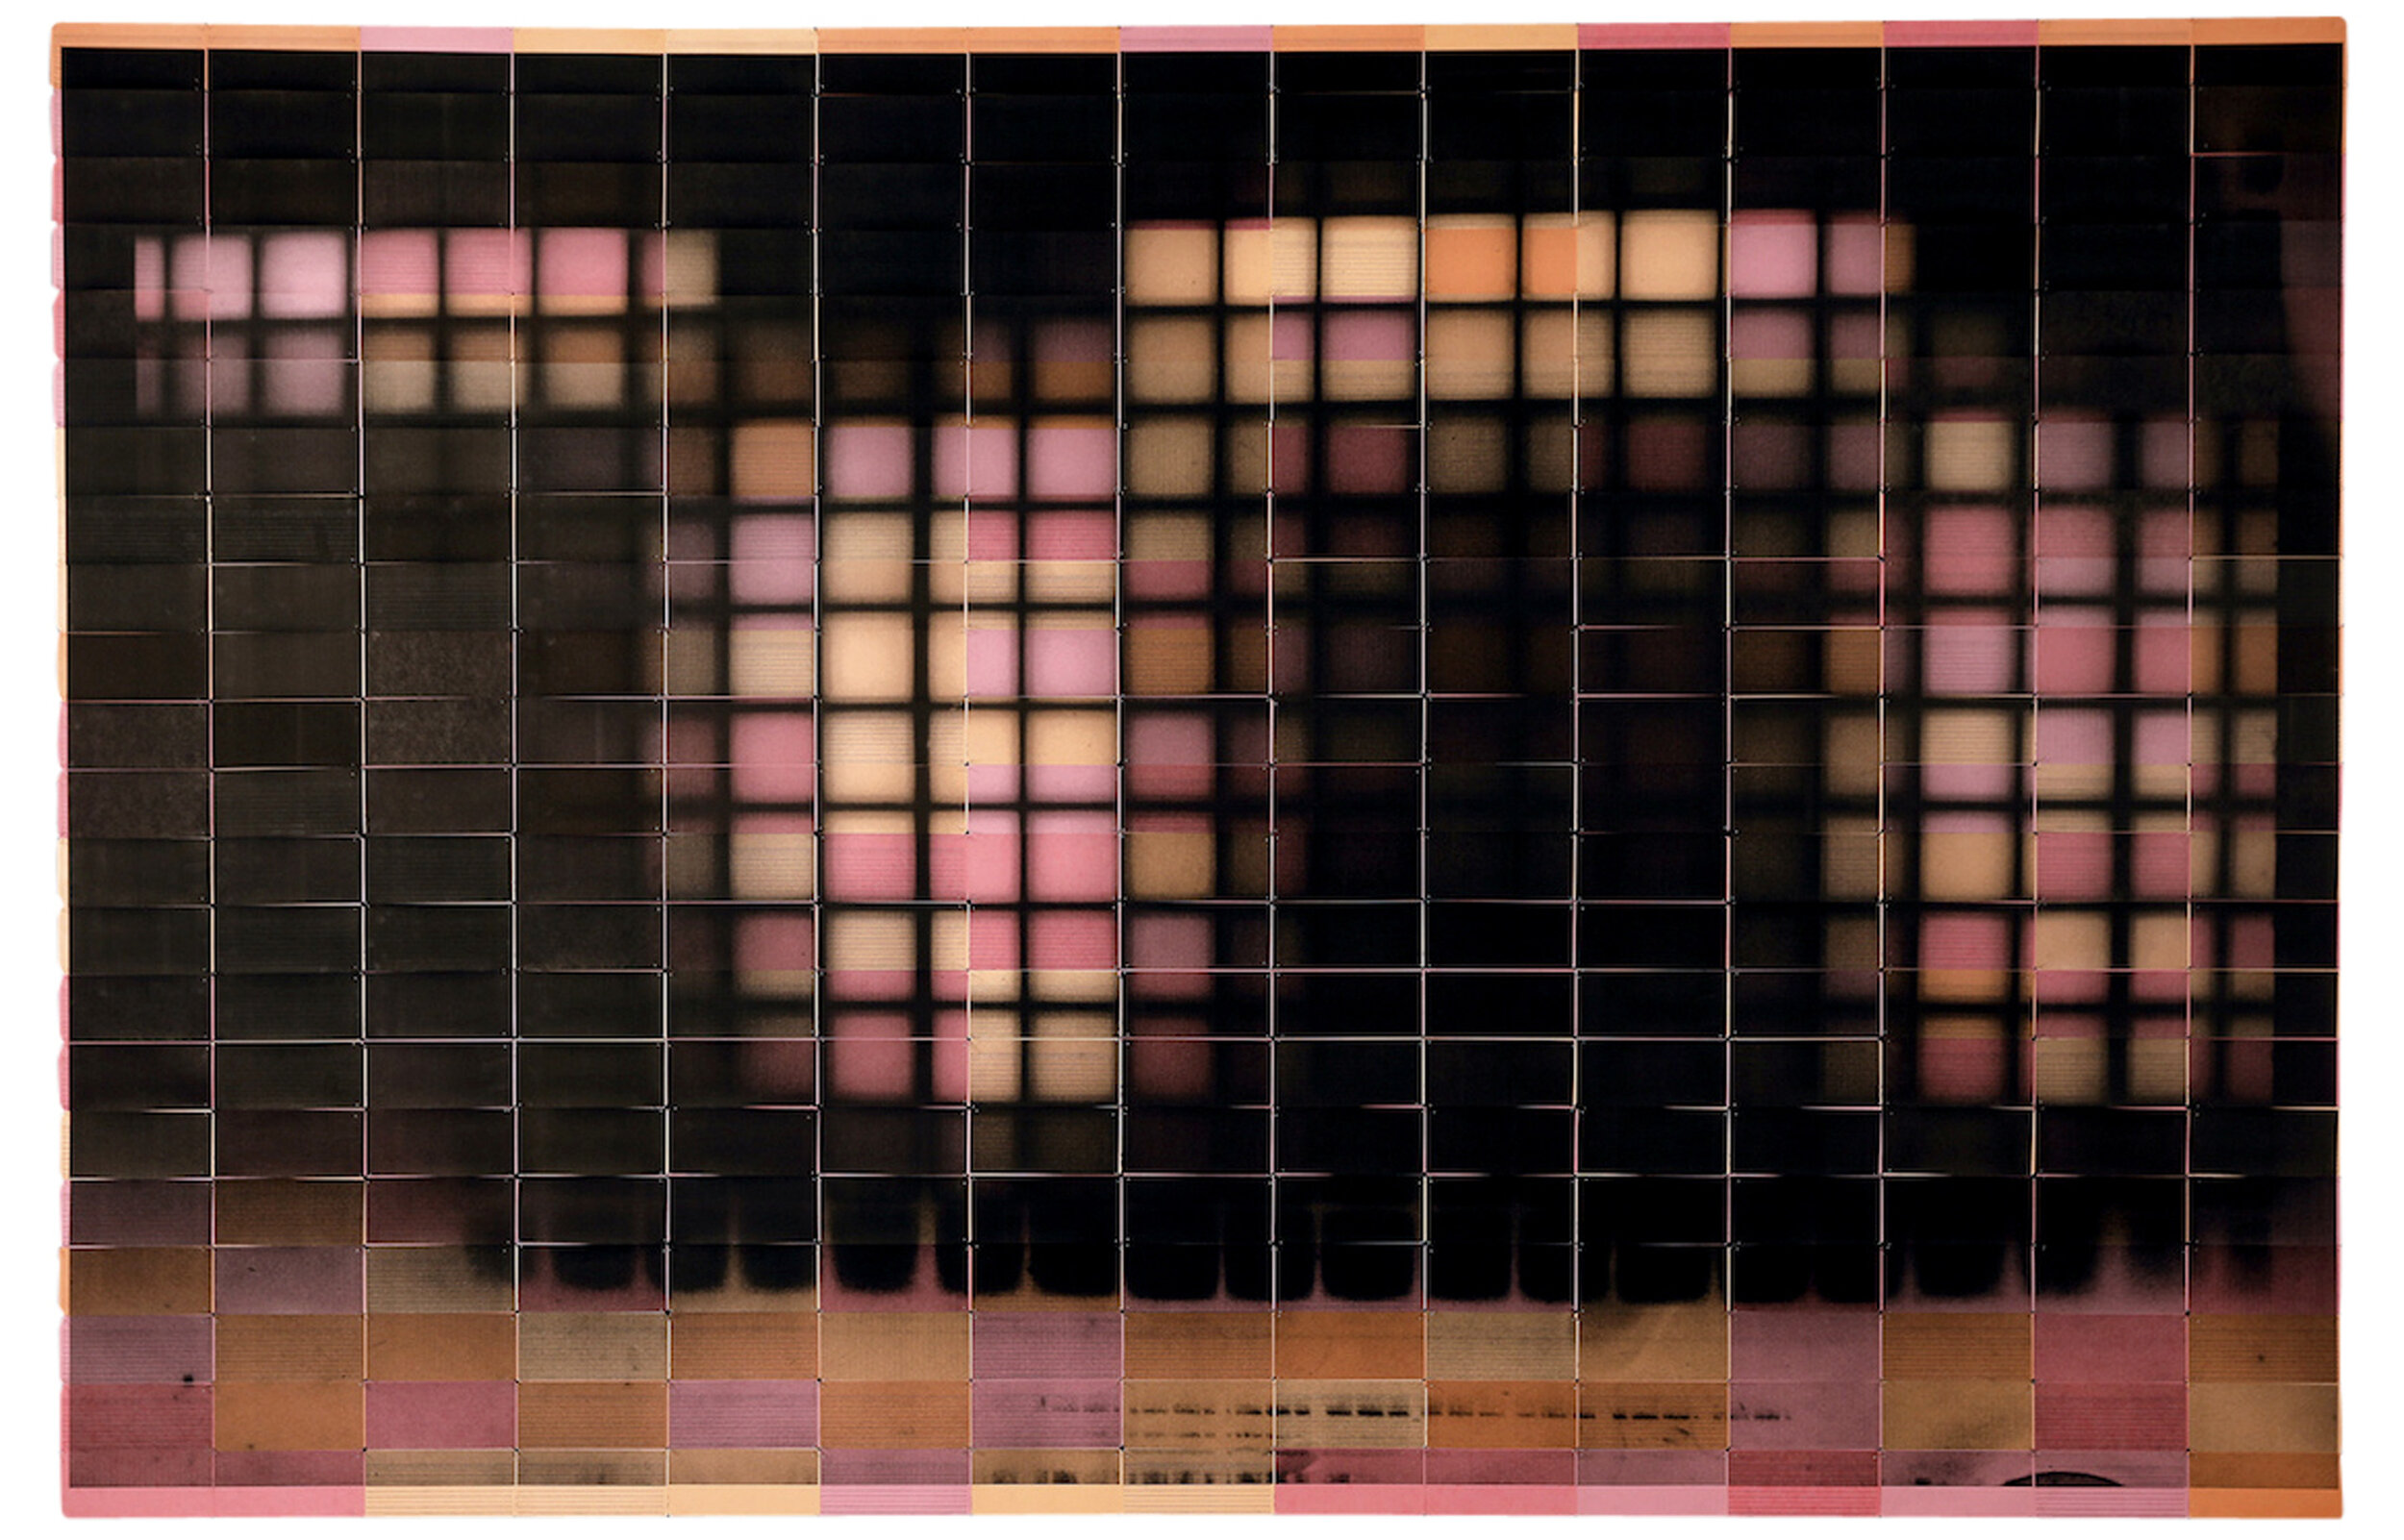 OSC56, 2018 Inkjet on 330 peach, pink and orange computer punch cards Negative date 2015 182.6 x 280.5 cm.jpg